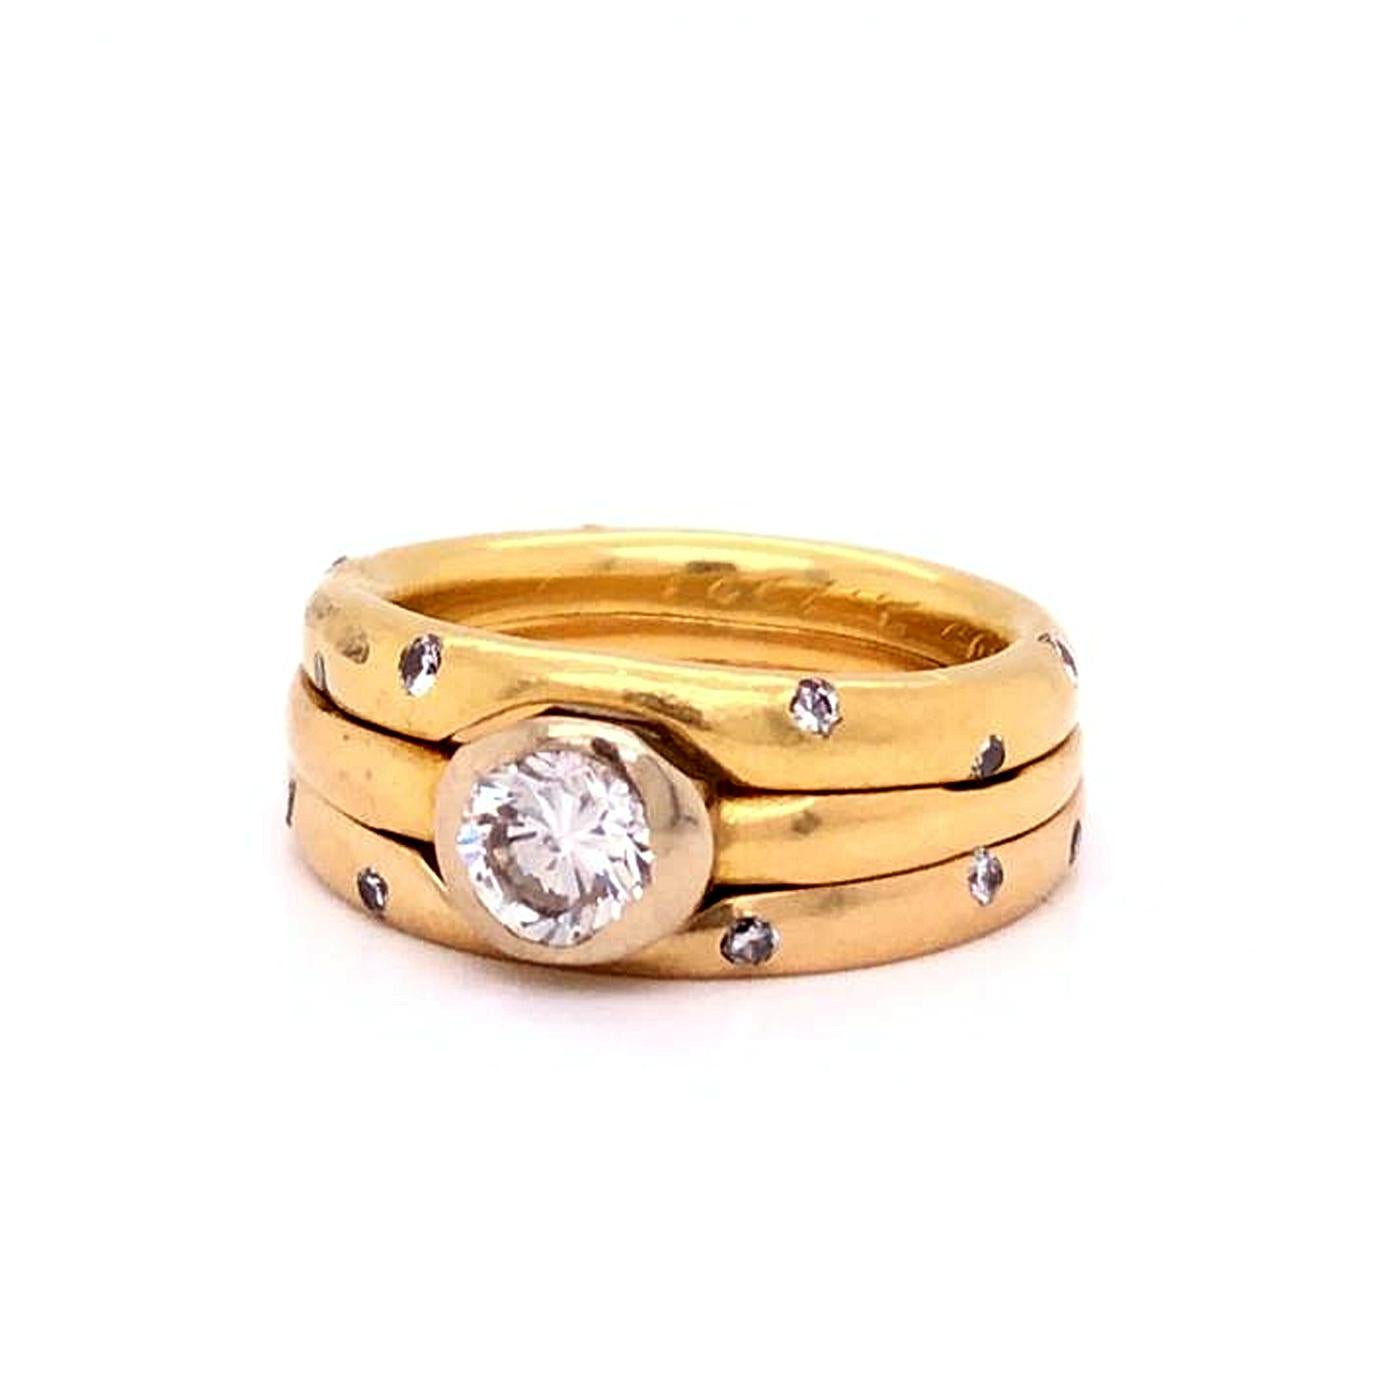 Trinity ring, 18 karats yellow Gold, Center stone approx 0.80ct G/H color VS1 - Clarity With additional 22 Round diamonds 0.35 Carat total Size 6.5

Specification:
Metal Purity: 18k
Sizable: No
Style: Band / Ring
Style: Rolling
Metal: Yellow